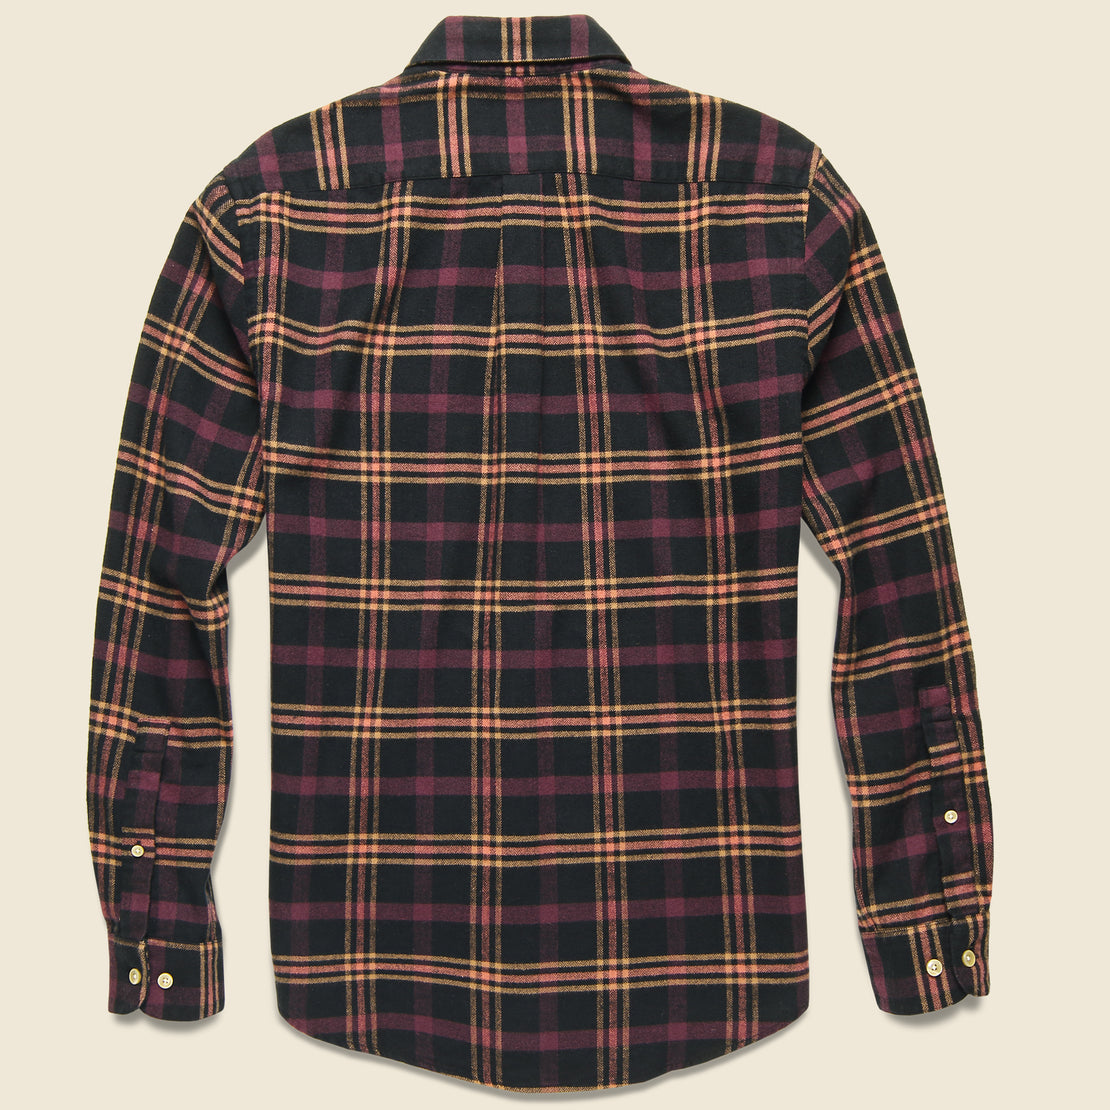 Compact Plaid Flannel - Black/Pink - Portuguese Flannel - STAG Provisions - Tops - L/S Woven - Plaid